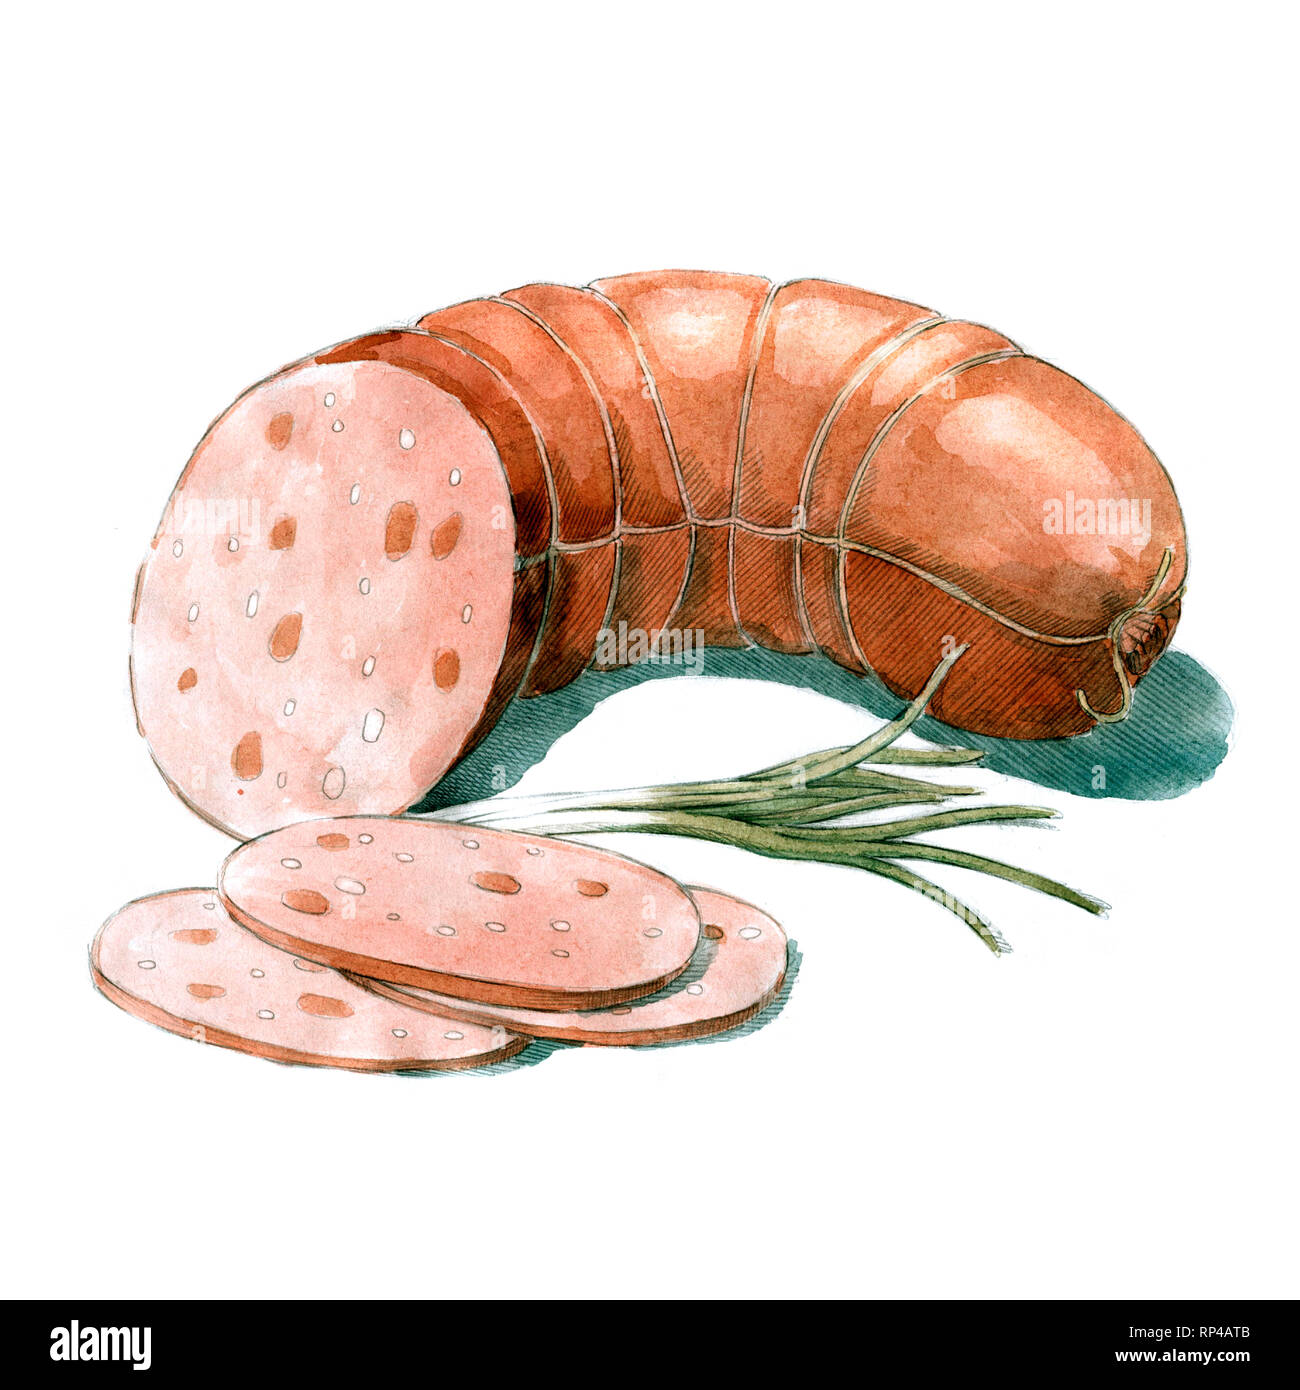 Boiled sausage watercolor illustration on white background Stock Photo